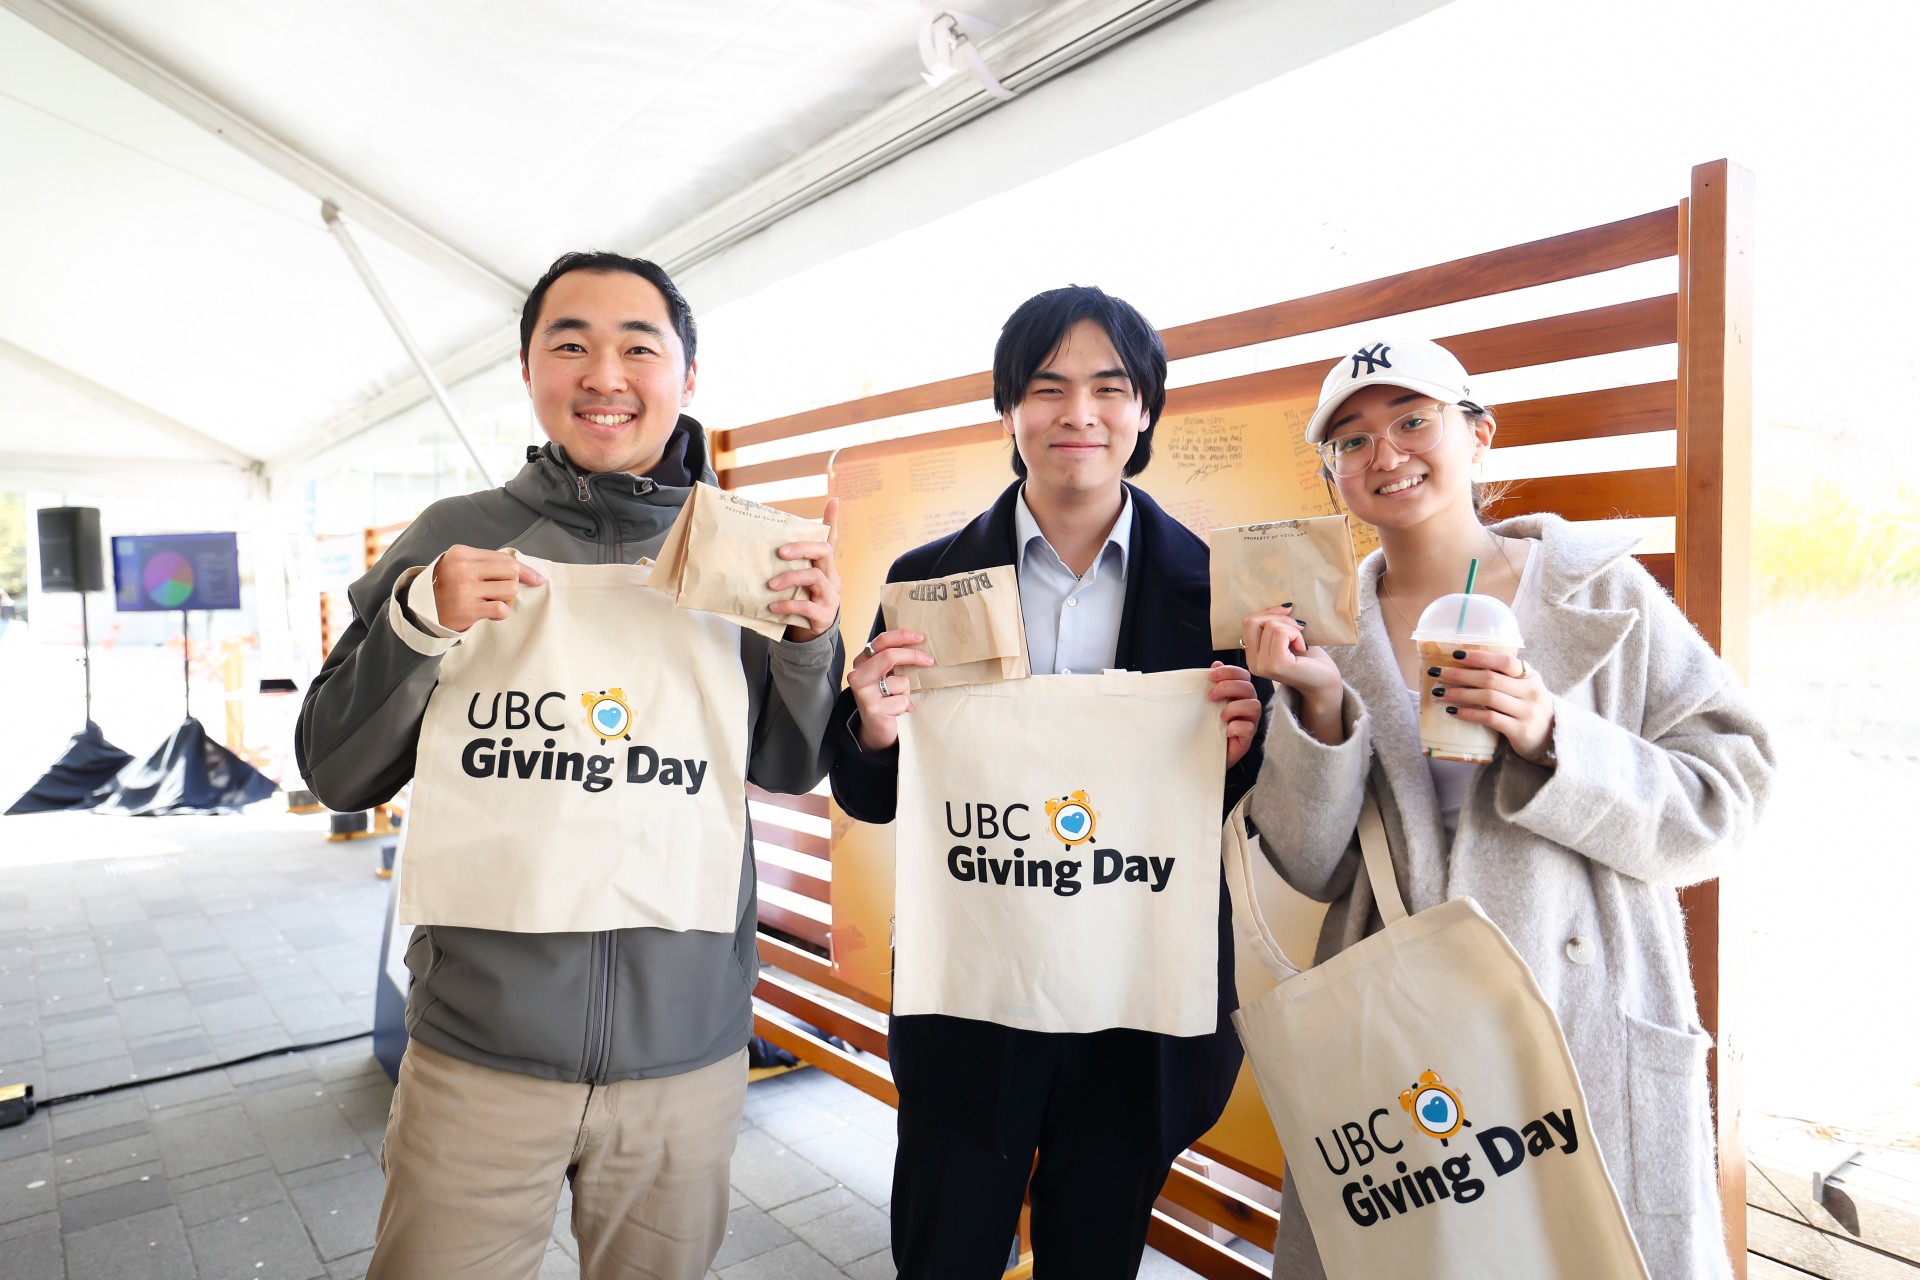 Three happy individuals holding UBC Giving Day tote bags showing support for a philanthropic event.